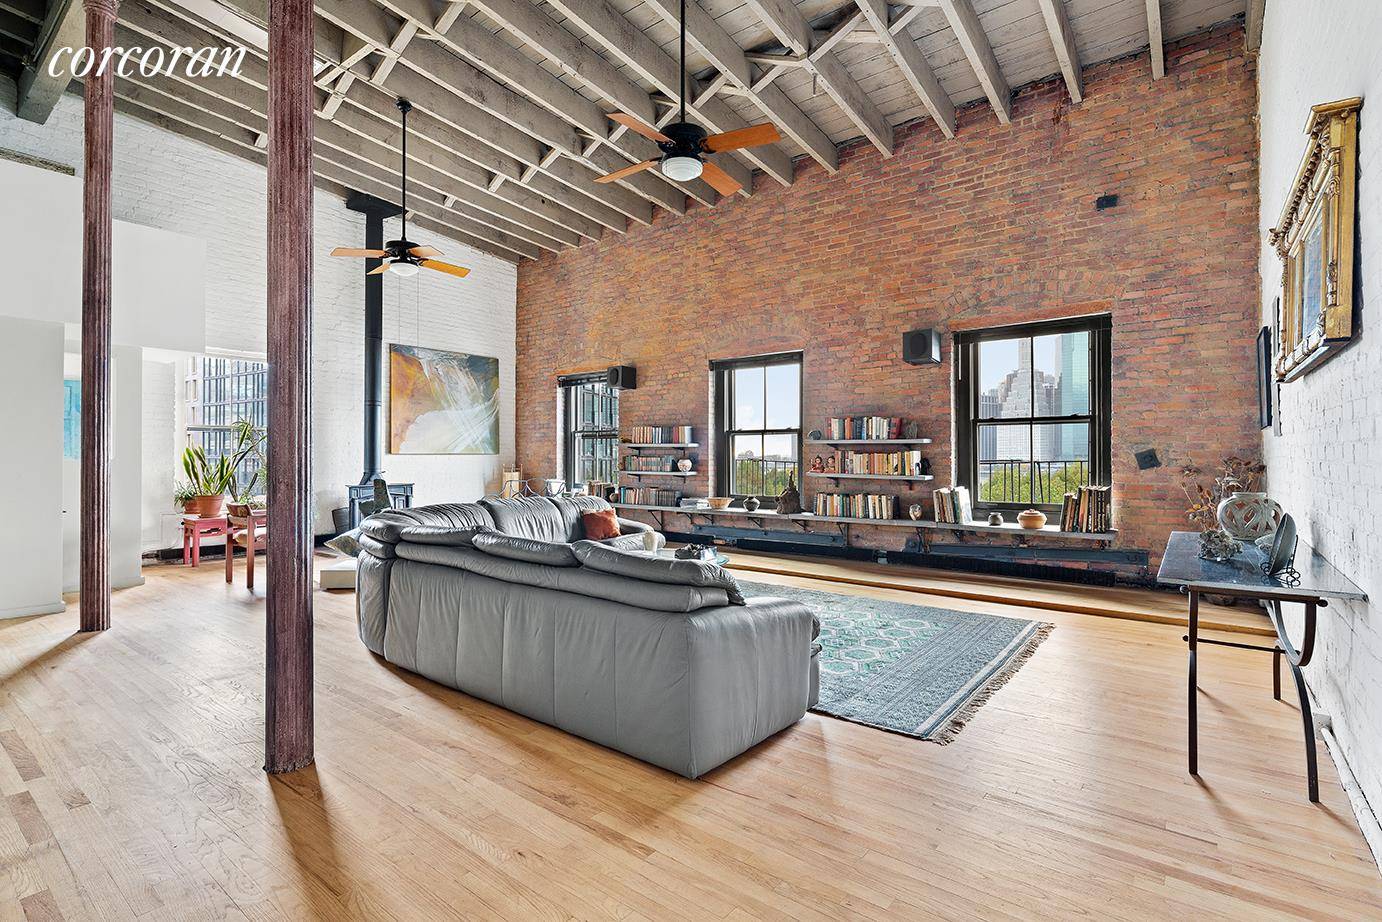 This stunning 2 bedroom, 2 bathroom waterfront duplex loft perched on the fifth floor of a boutique elevator coop offers architectural detailing rarely found in today's market with a private ...